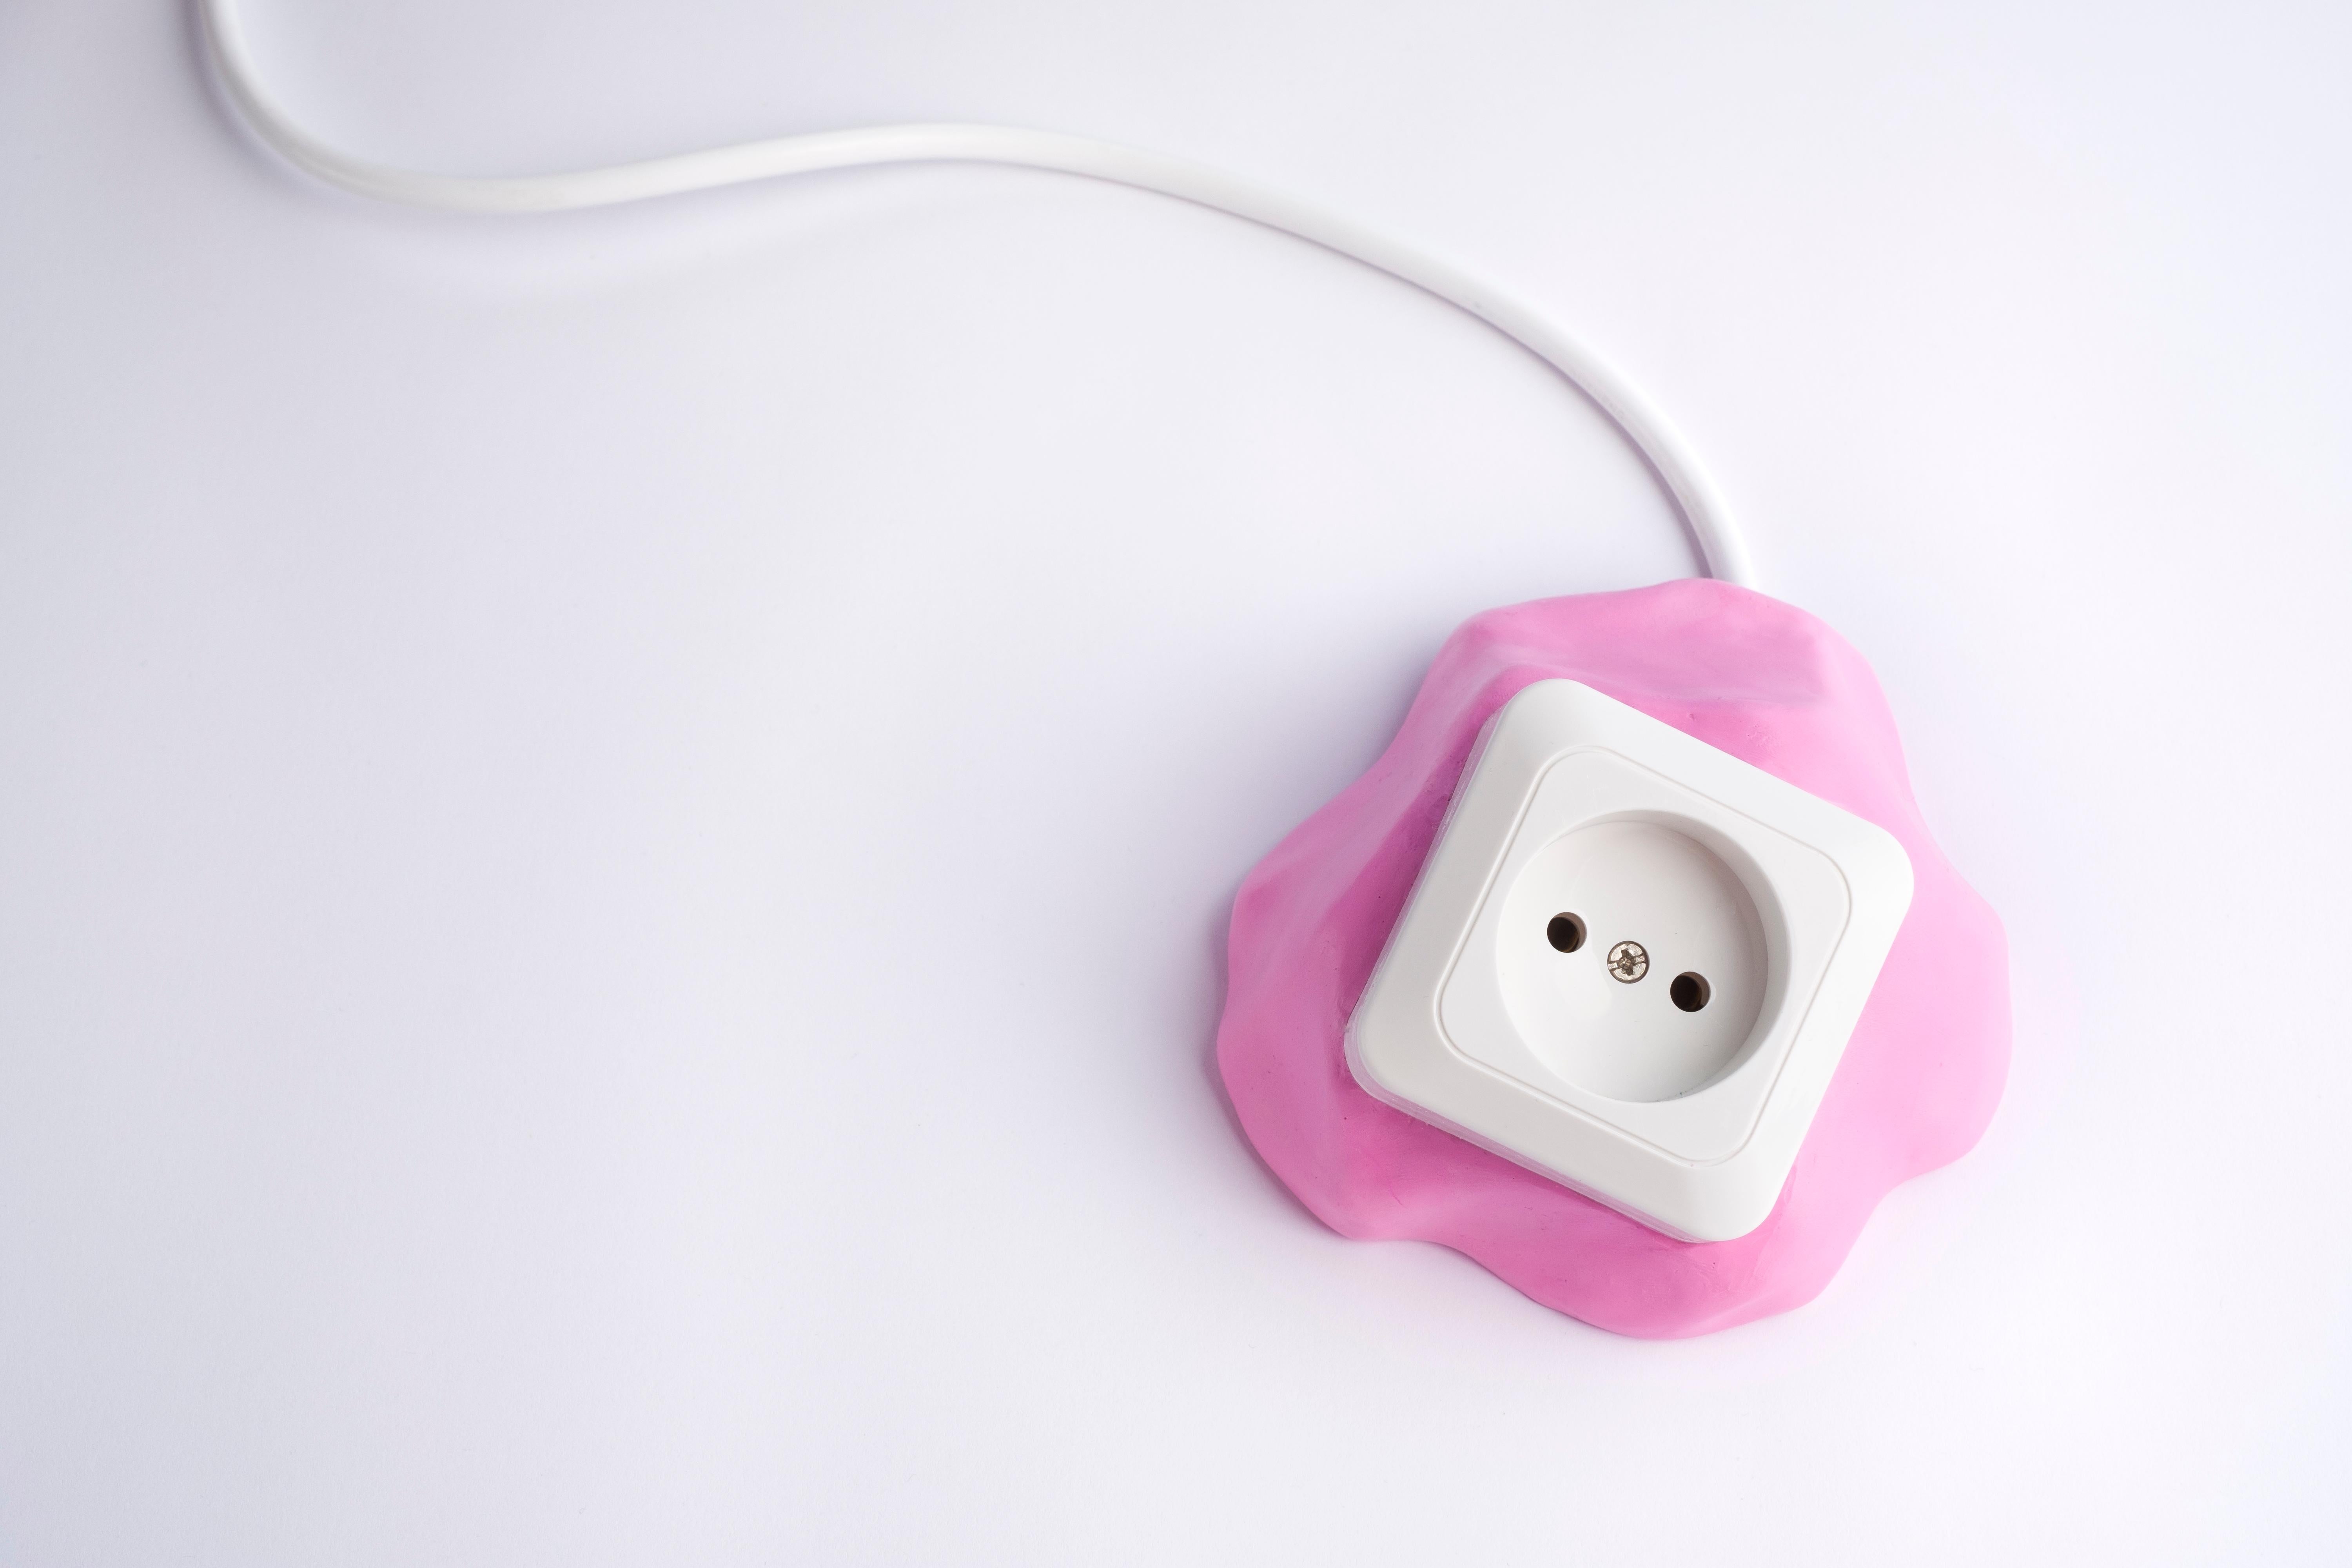 Single socket object 16.5. Rosa SAKER by Studio Gert Wessels, pink. handcrafted in an organic shape and made in his studio in the Netherlands. 

In his daily practice he investigates the relationship between form and function. The result is a